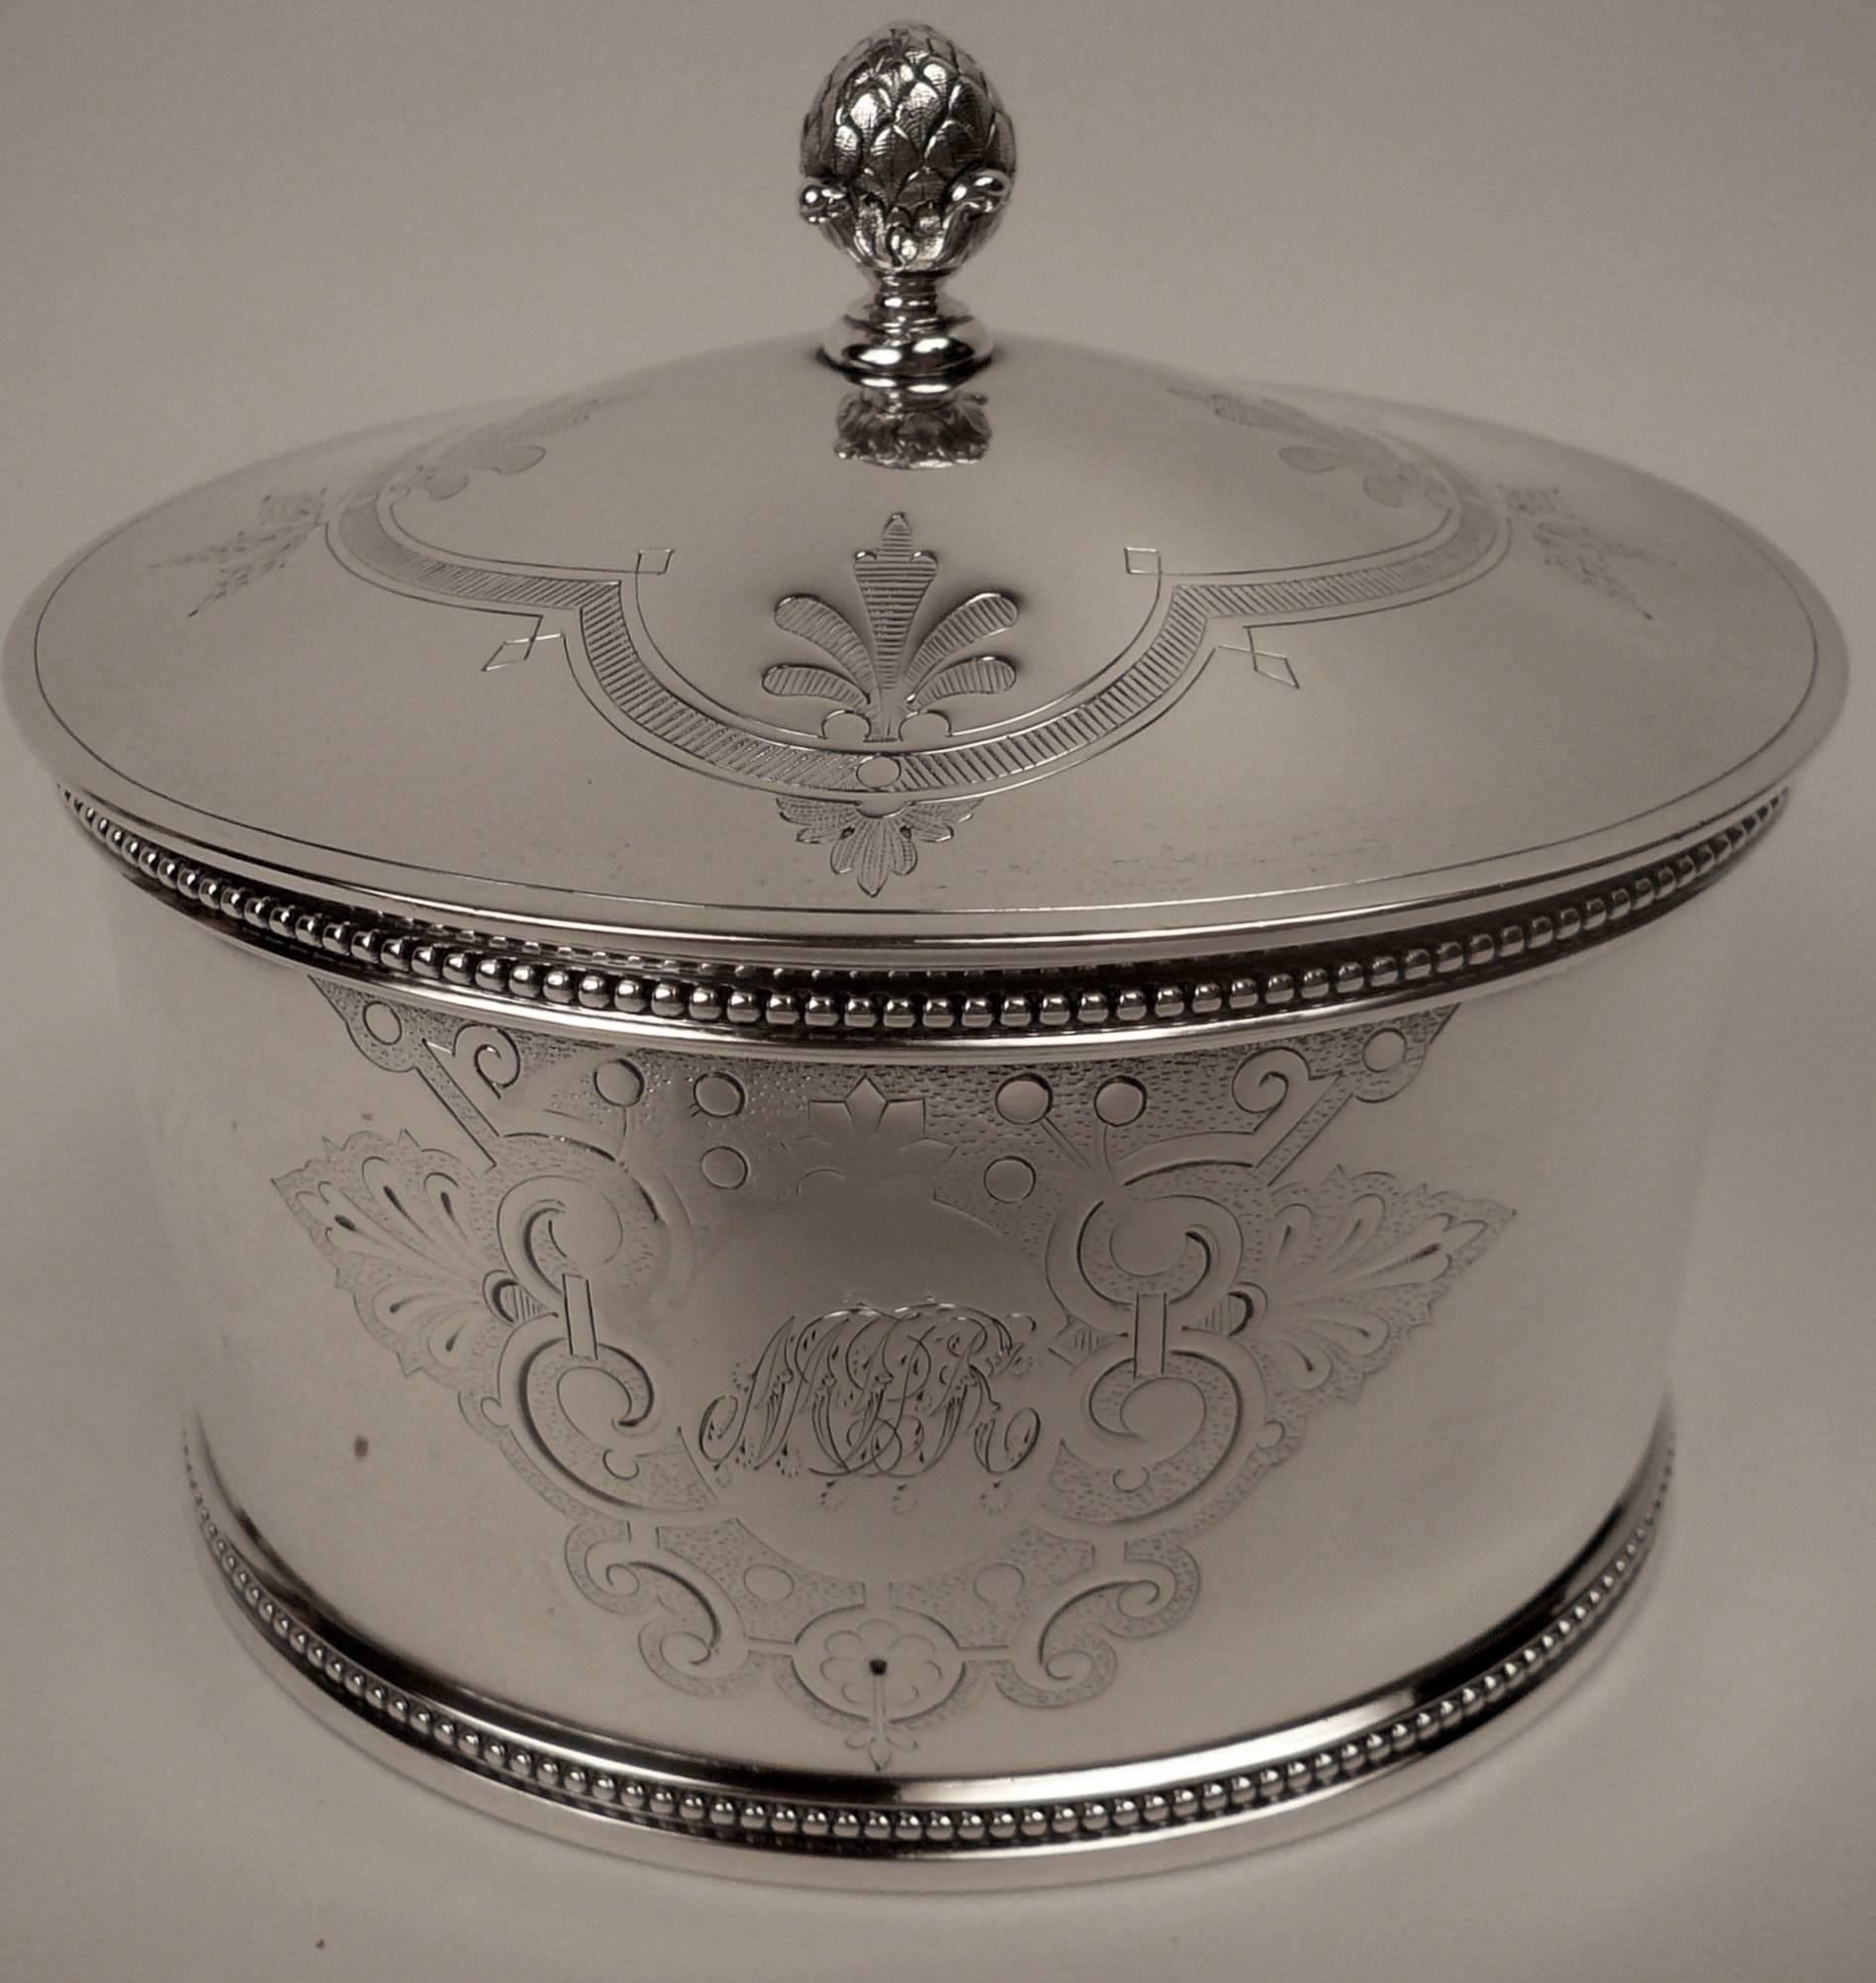 This hand chased heavy gauge sterling tea caddy was made in Boston by renowned makers Shreve and Stanwood, and weighs approximately 15 ounces.